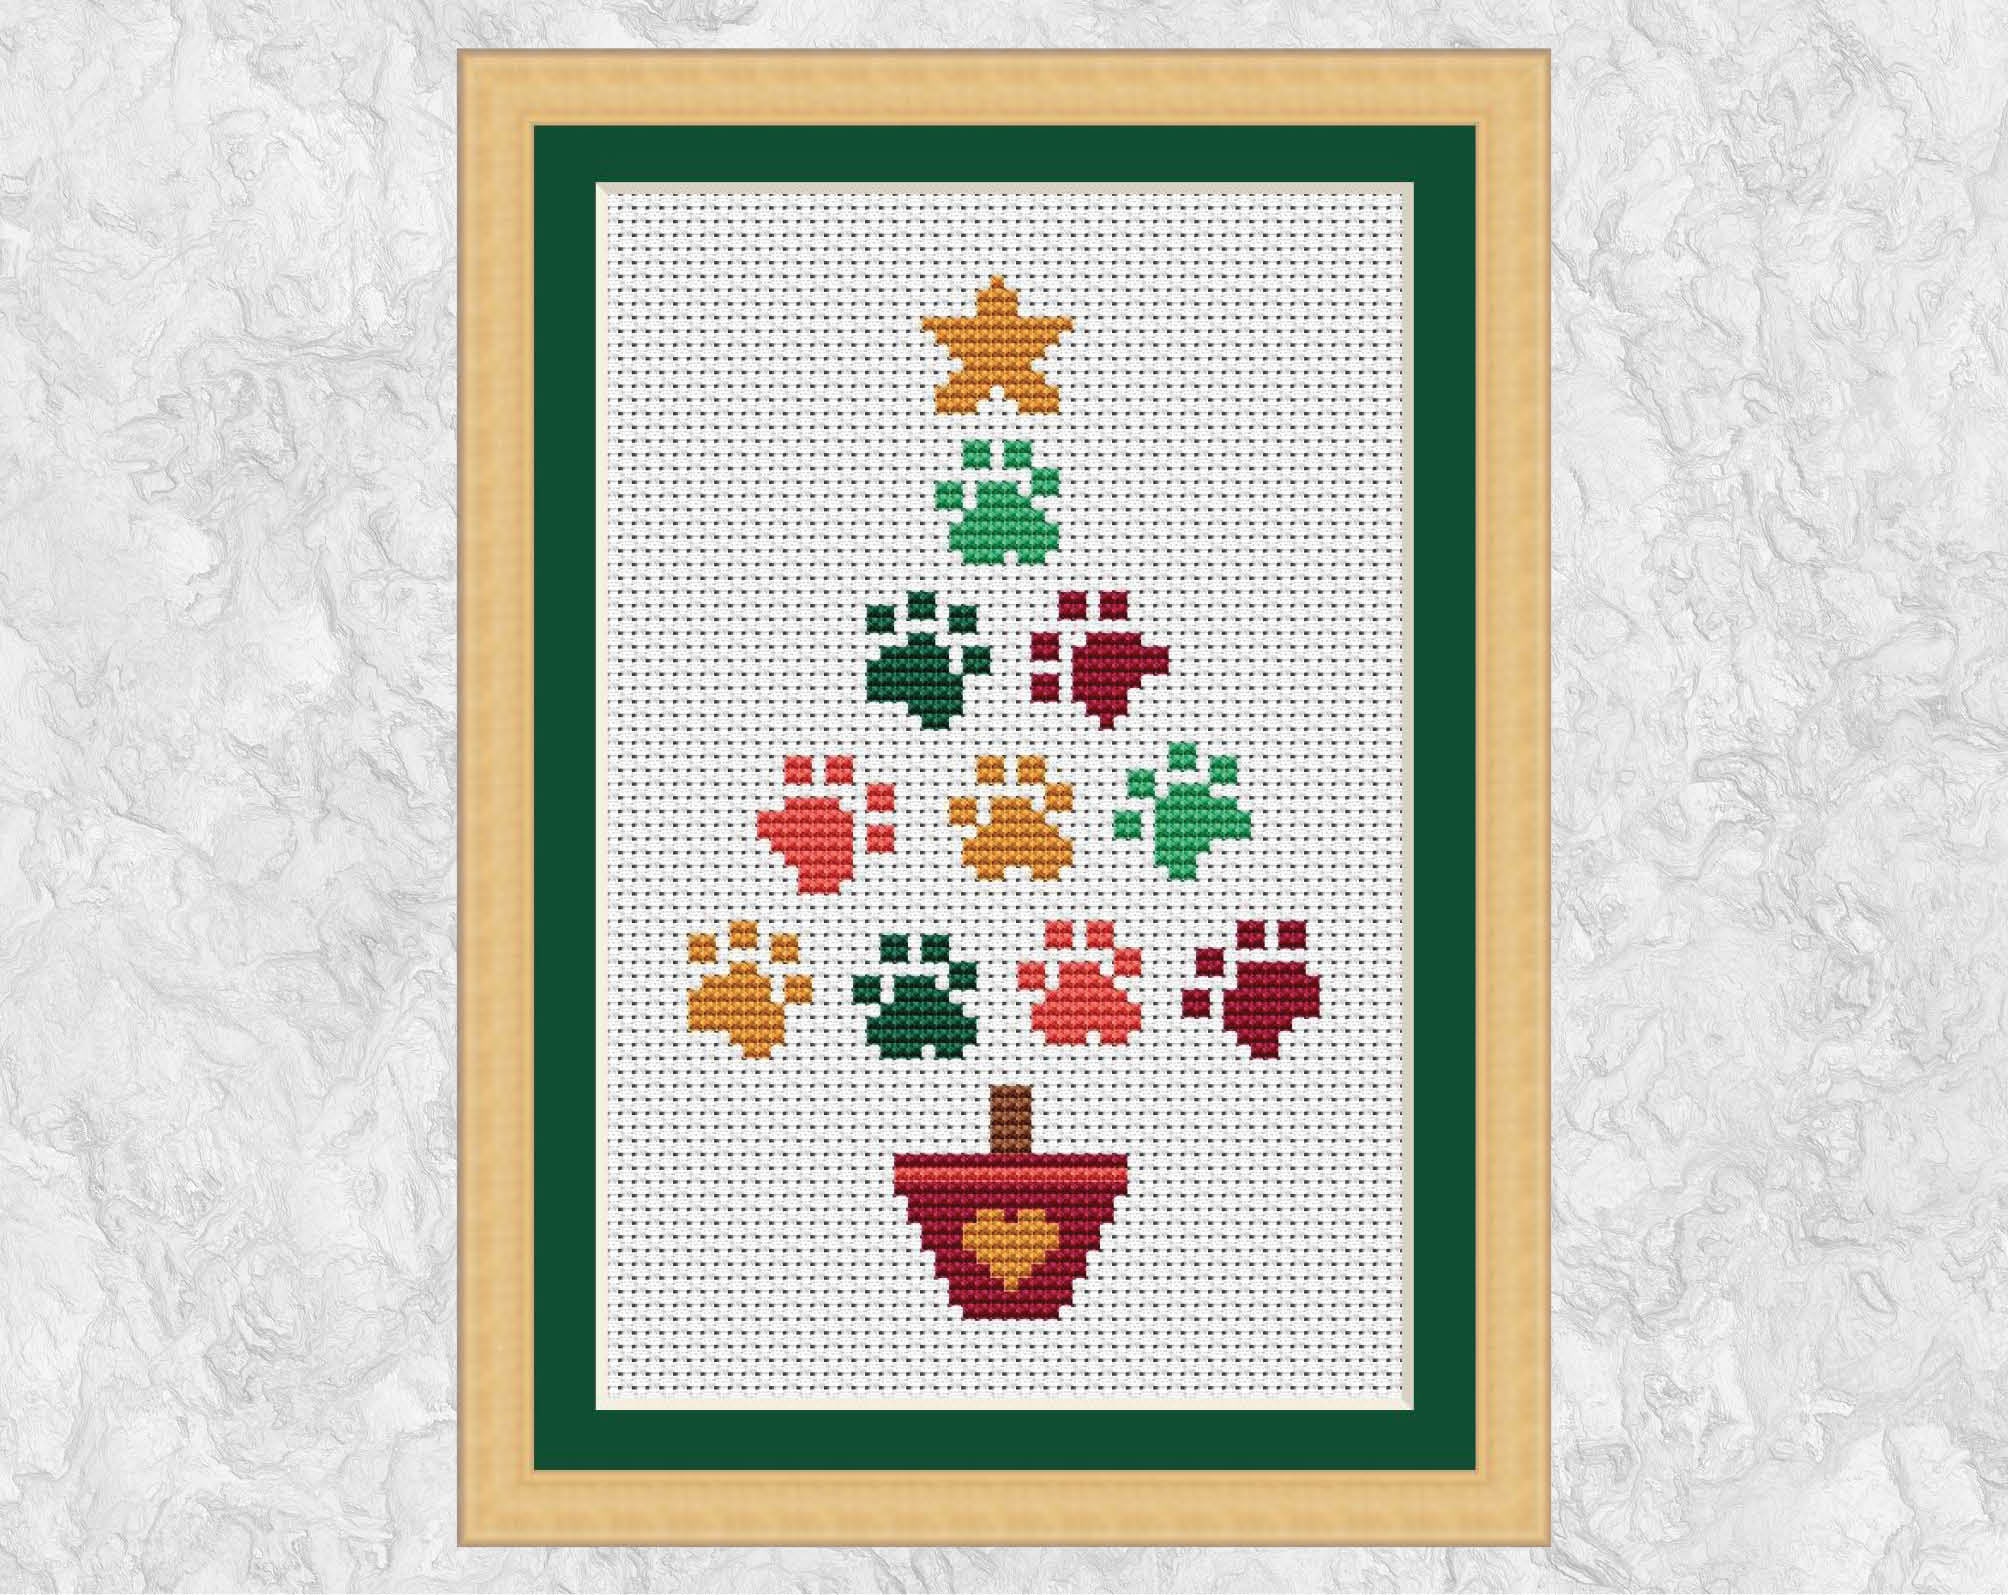 Stamped Winter Tree House Boys and Girls YEESAM ART New Counted Cross Stitch Kits Advanced Embroidery Set Needlework DIY Handmade Christmas Gifts 